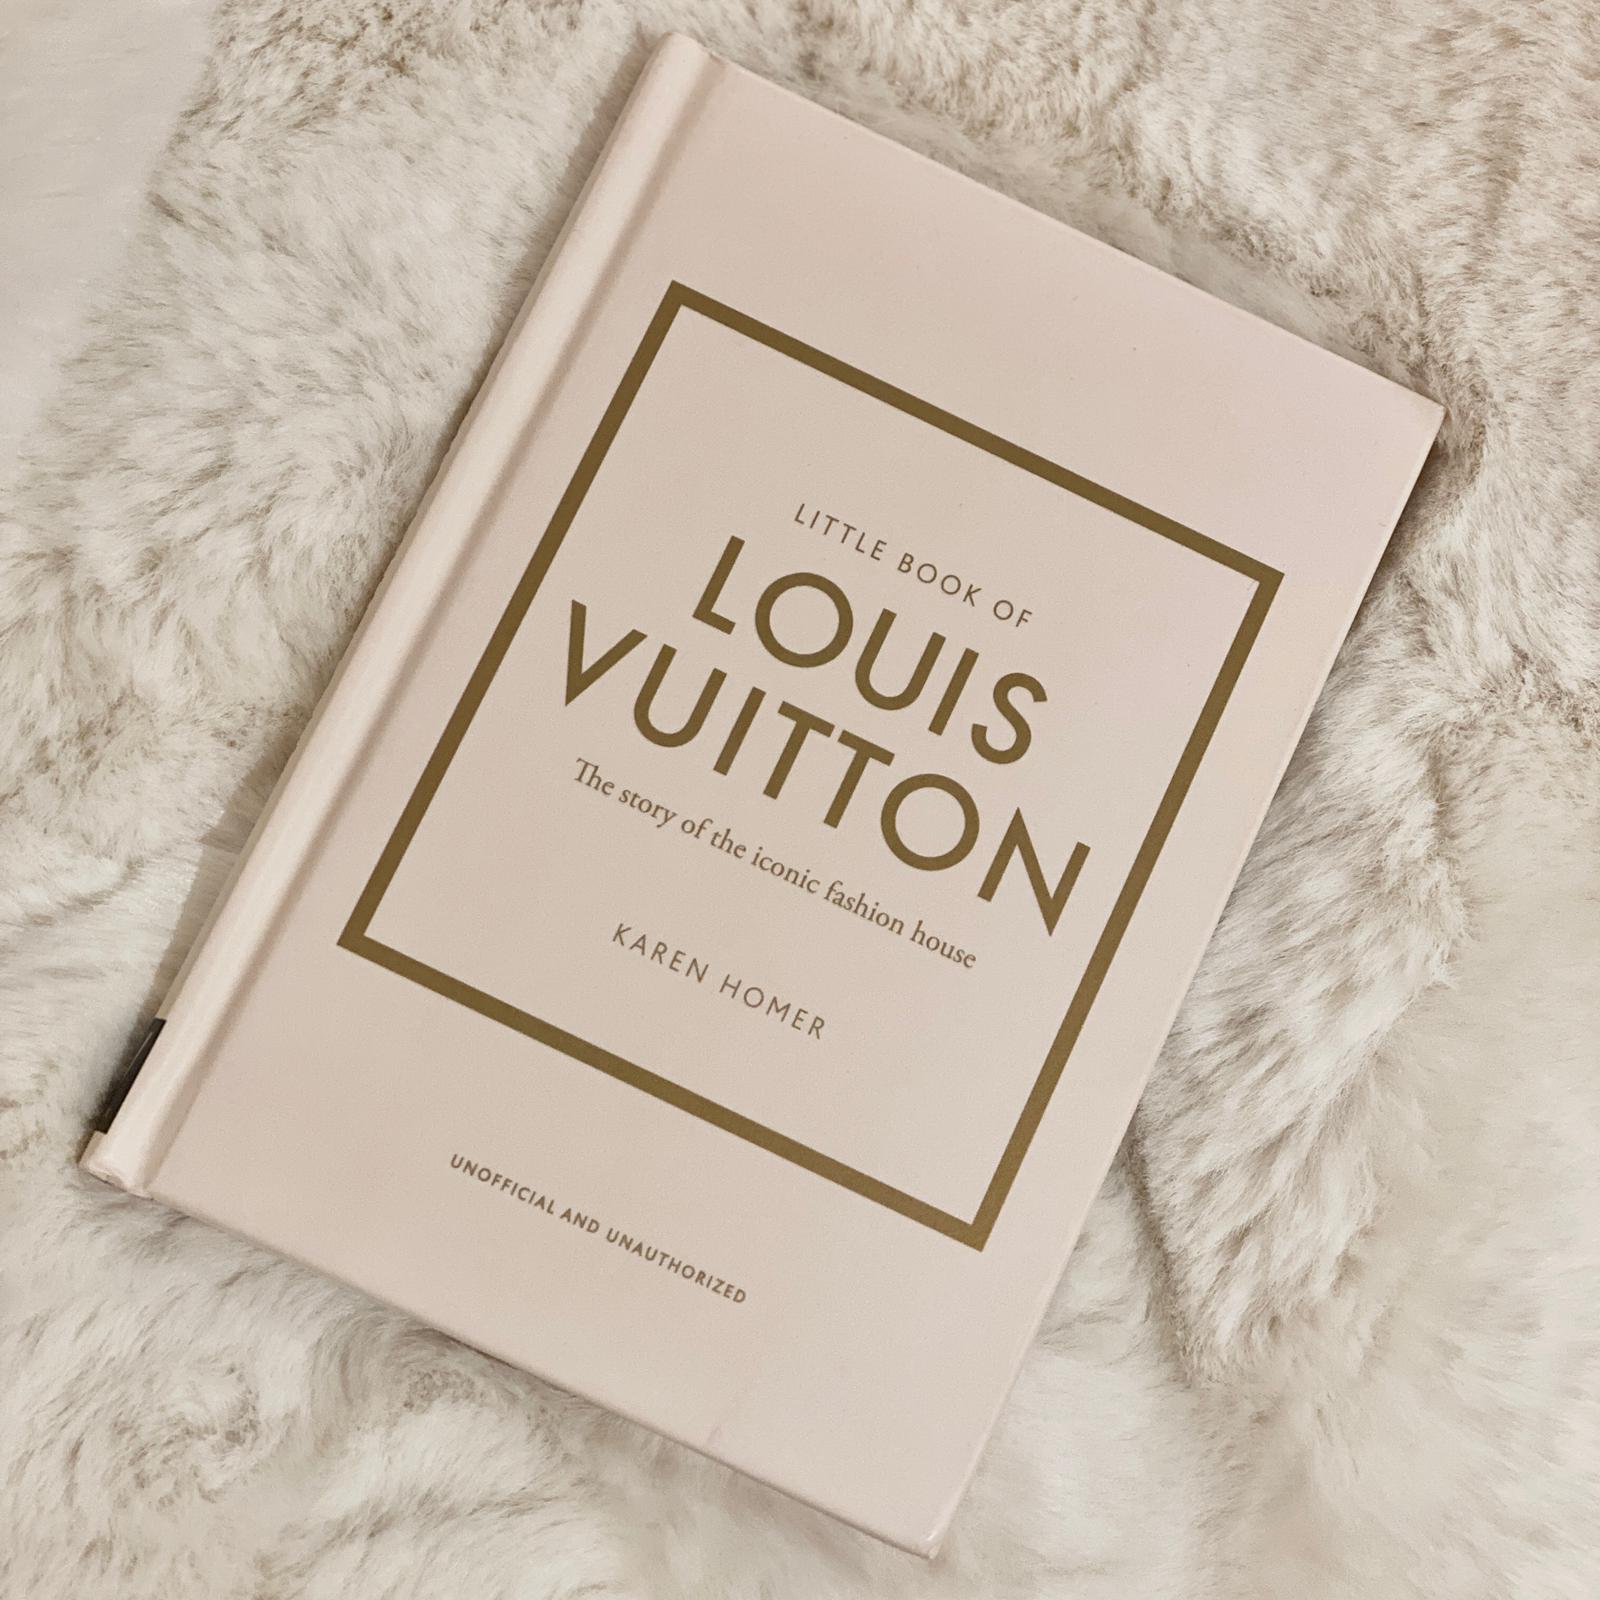 Little Book of Louis Vuitton: The Story of the Iconic Fashion